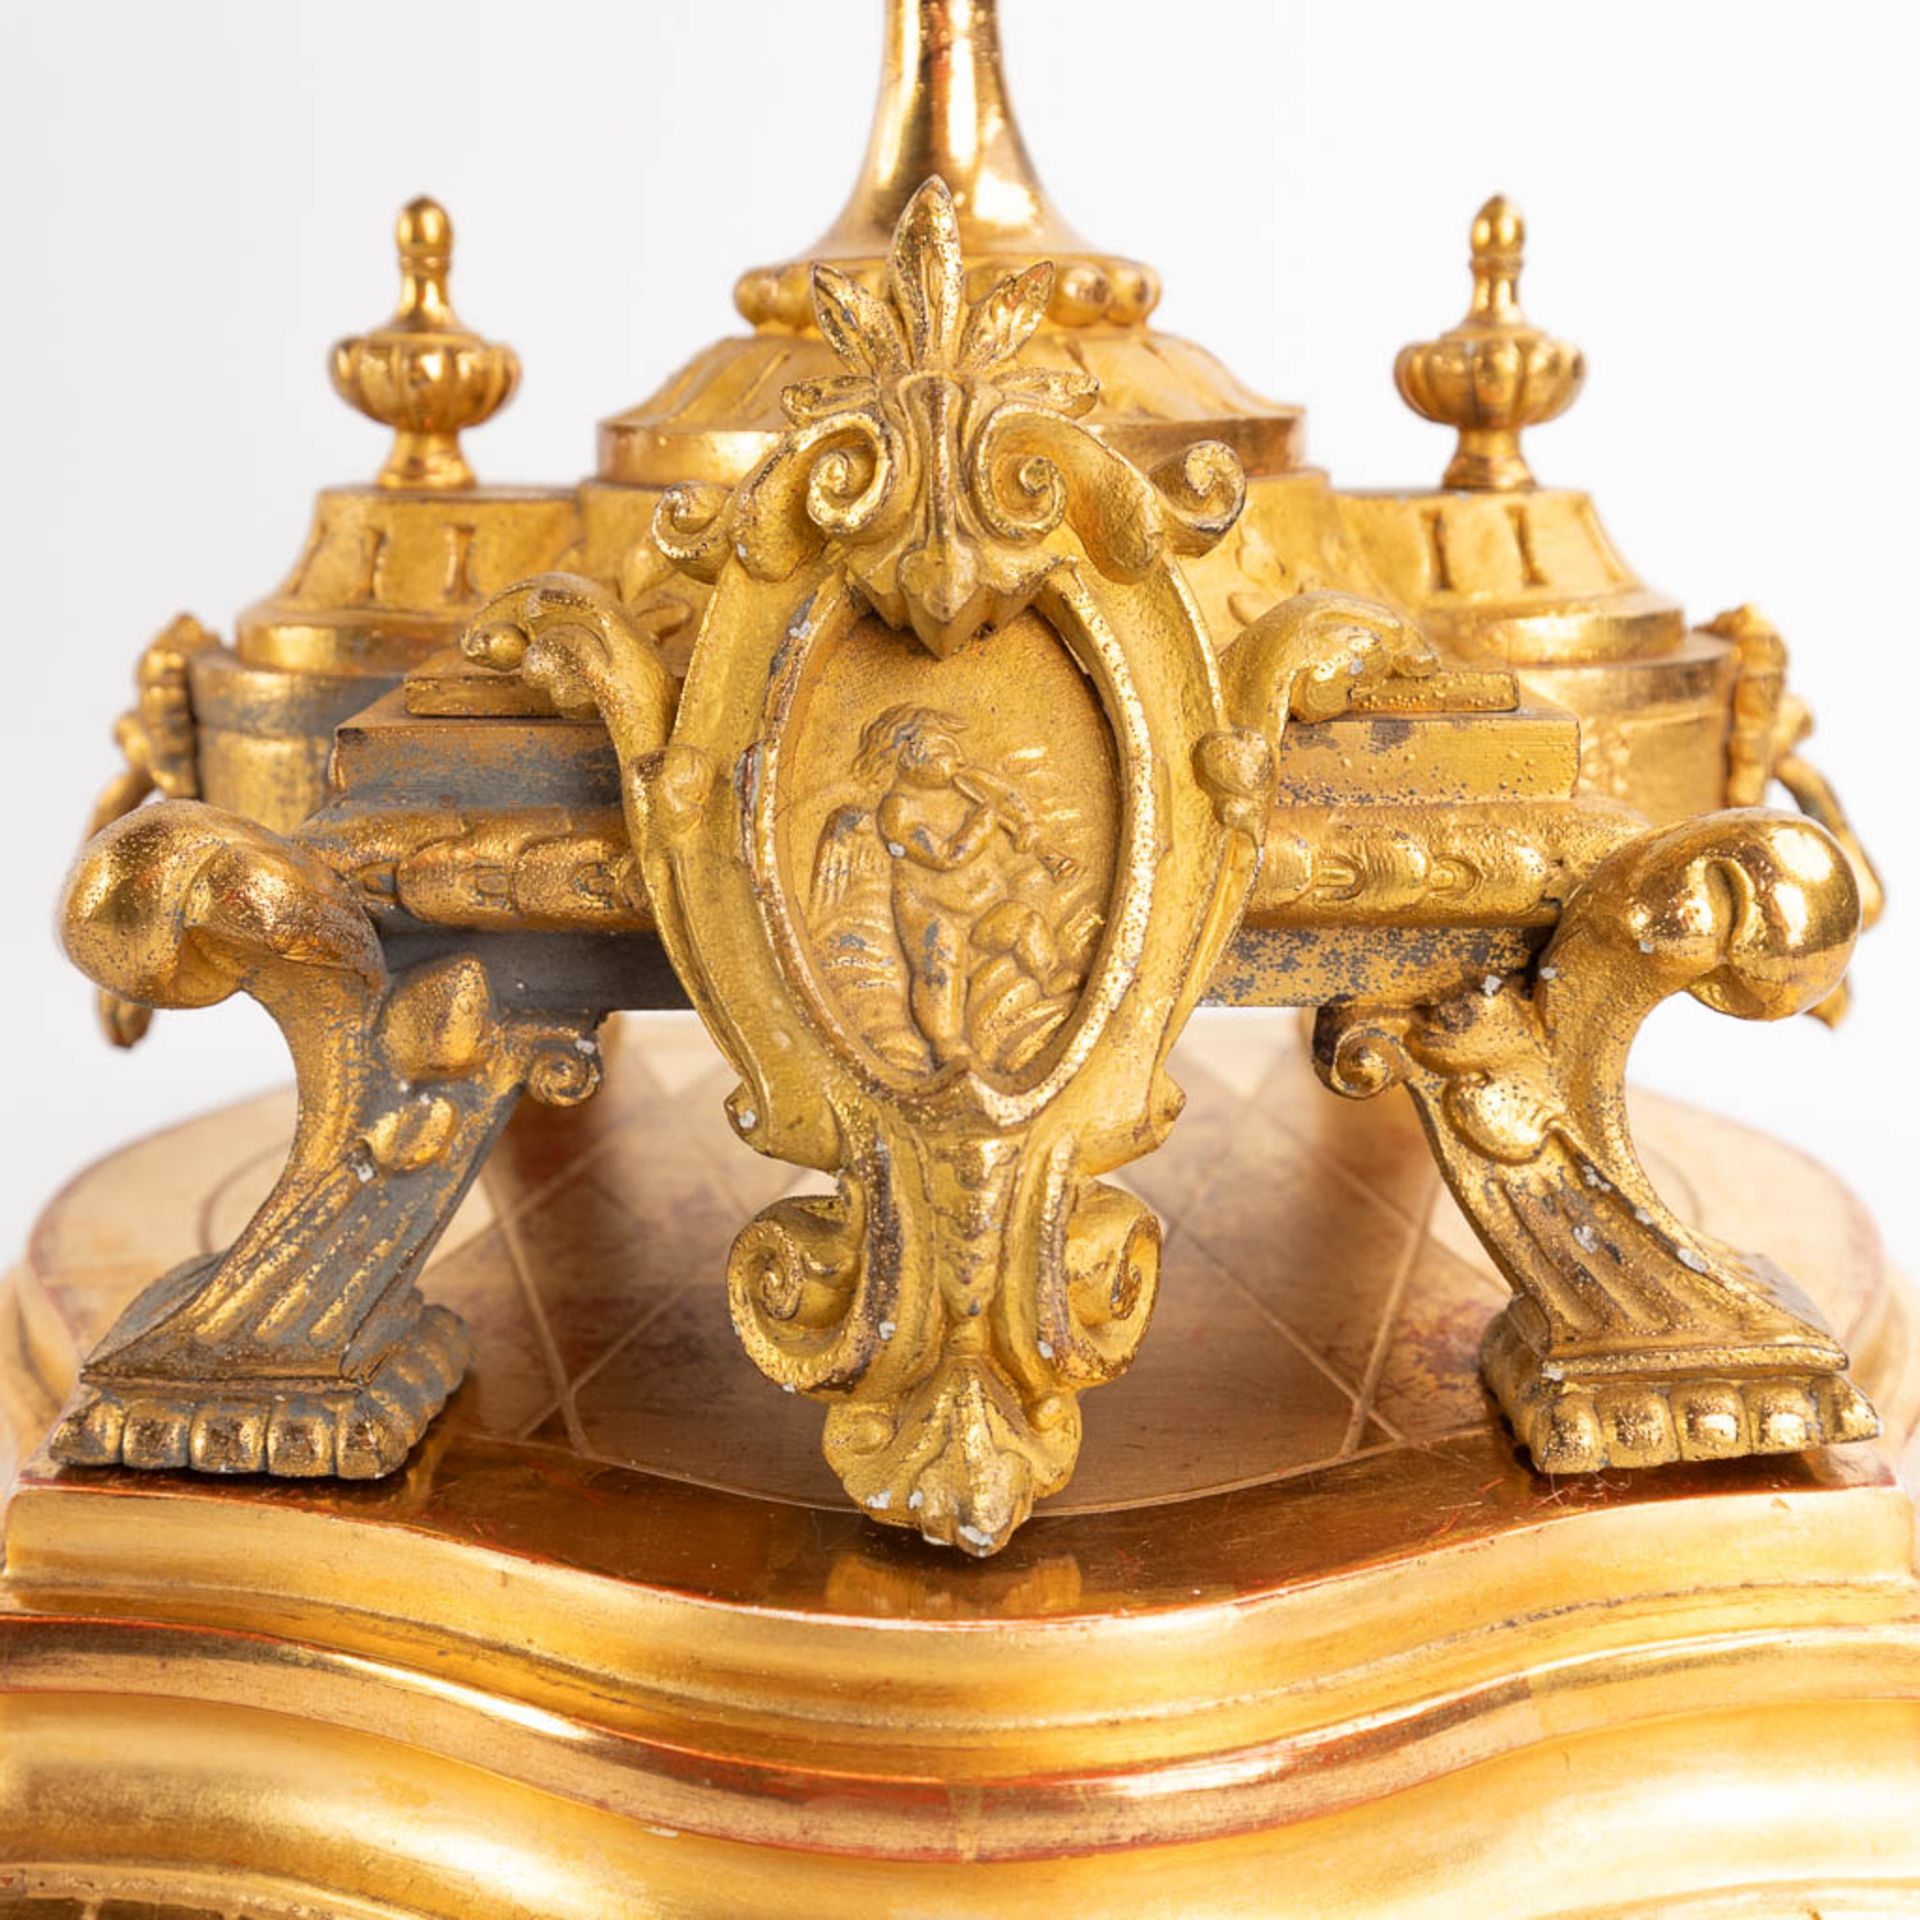 A three-piece mantle garniture clock and candelabra, gilt spelter, decorated with putti. Circa 1900. - Image 12 of 19